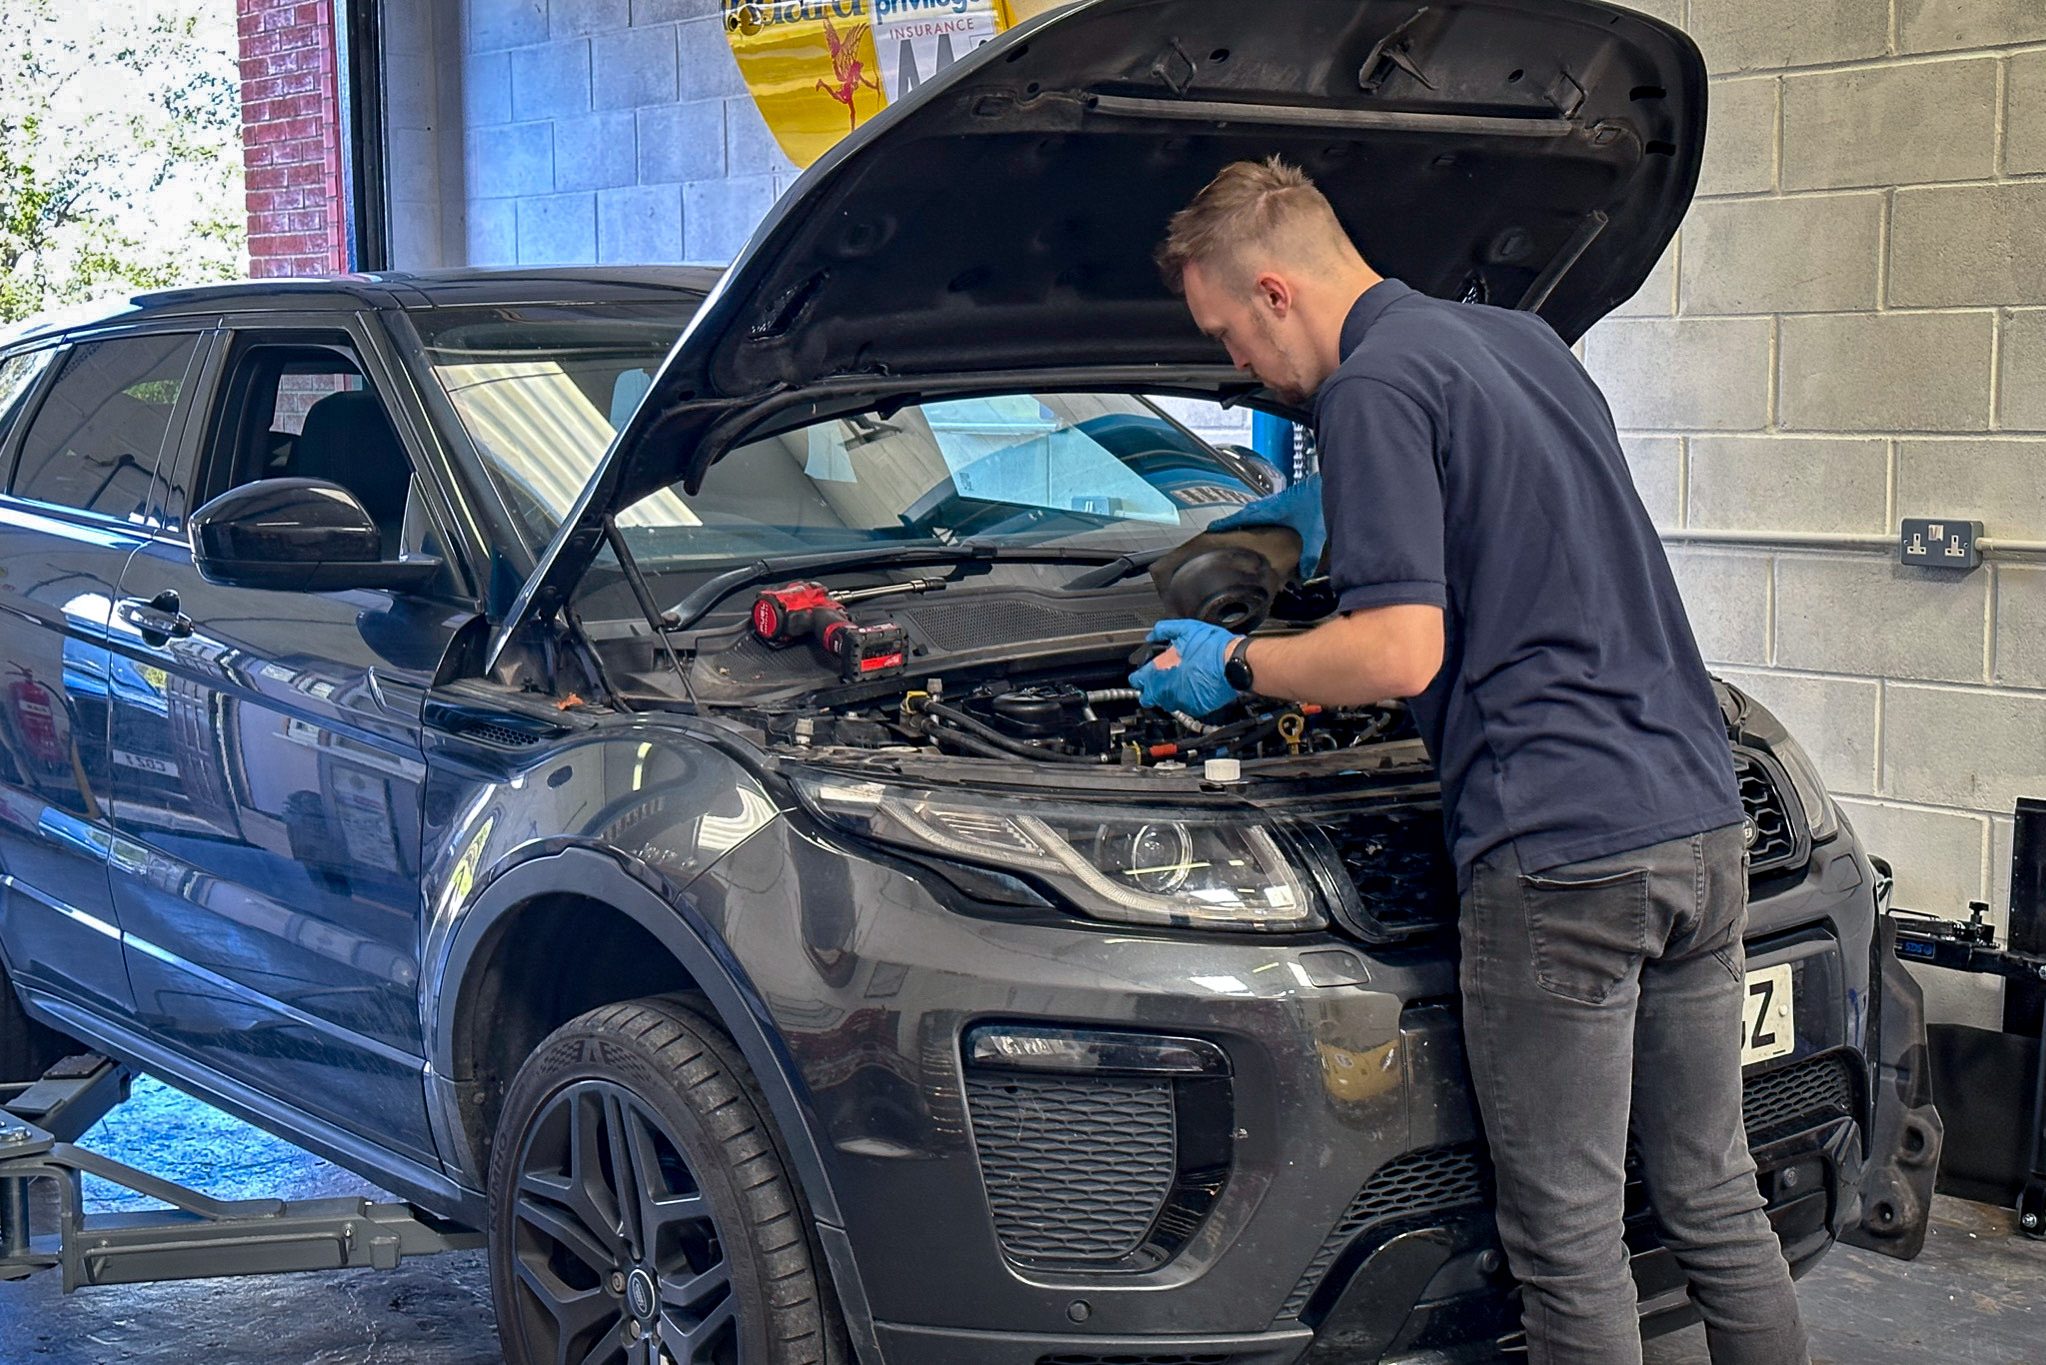 A skilled mechanic from Coastal Motorsport a Garage North Walsham is engaged in servicing a Range Rover. He stands with focus and precision as he works under the raised bonnet, with various tools laid out beside him, indicative of the thorough maintenance being performed. The vehicle's sleek black exterior is contrasted against the bright and orderly garage interior, reflecting the high standards of vehicle care and expertise offered.